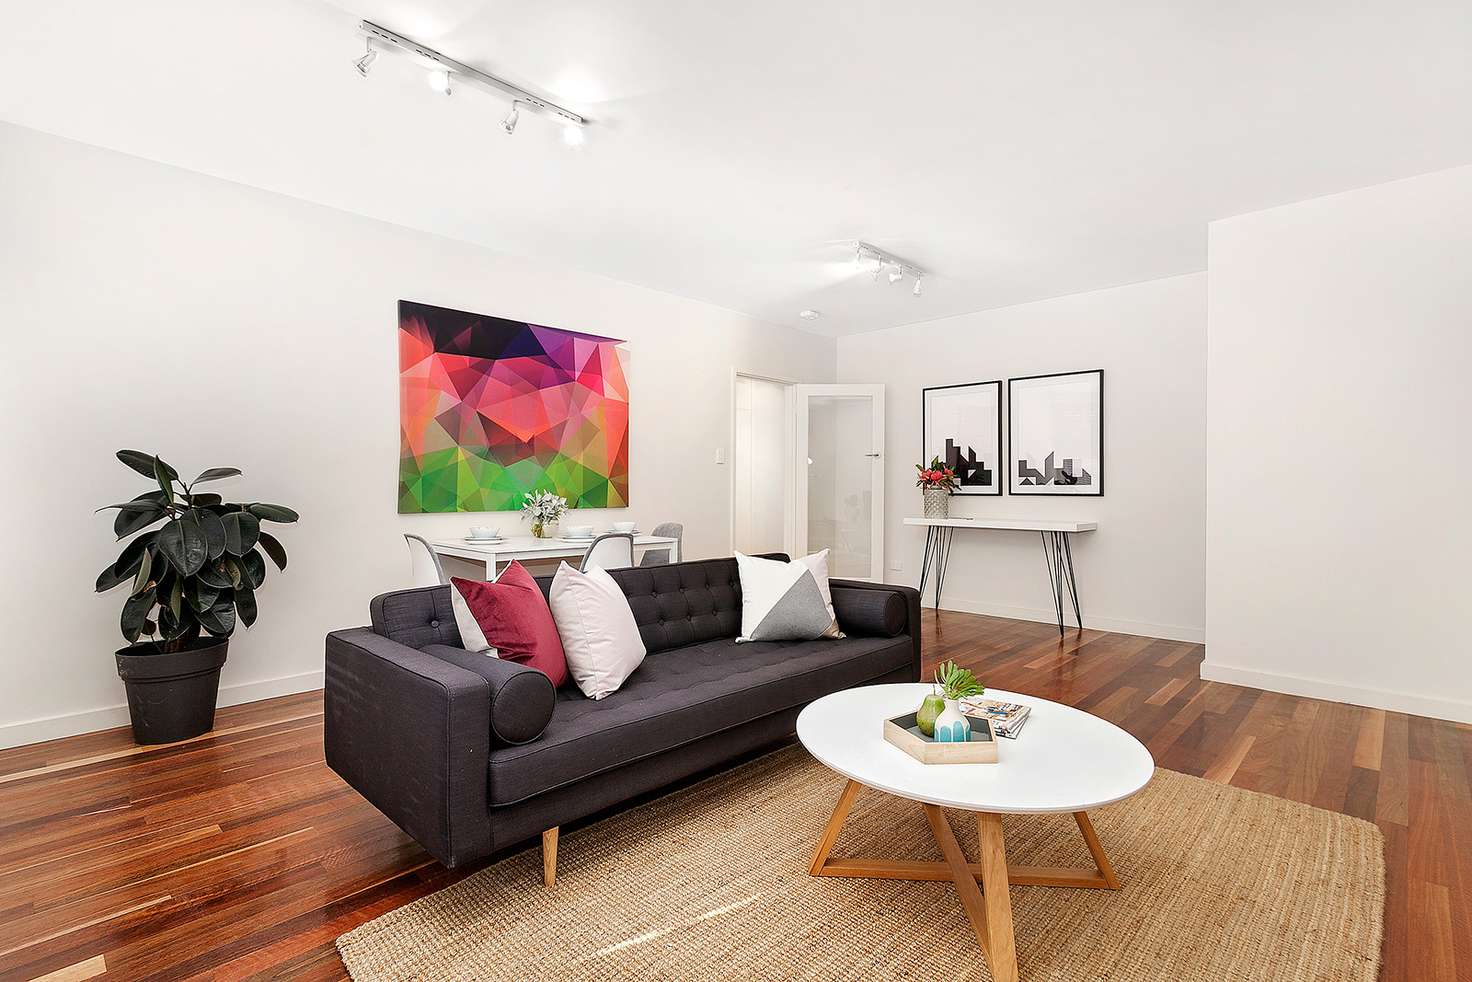 Main view of Homely apartment listing, 7/2 Maple Grove, Toorak VIC 3142